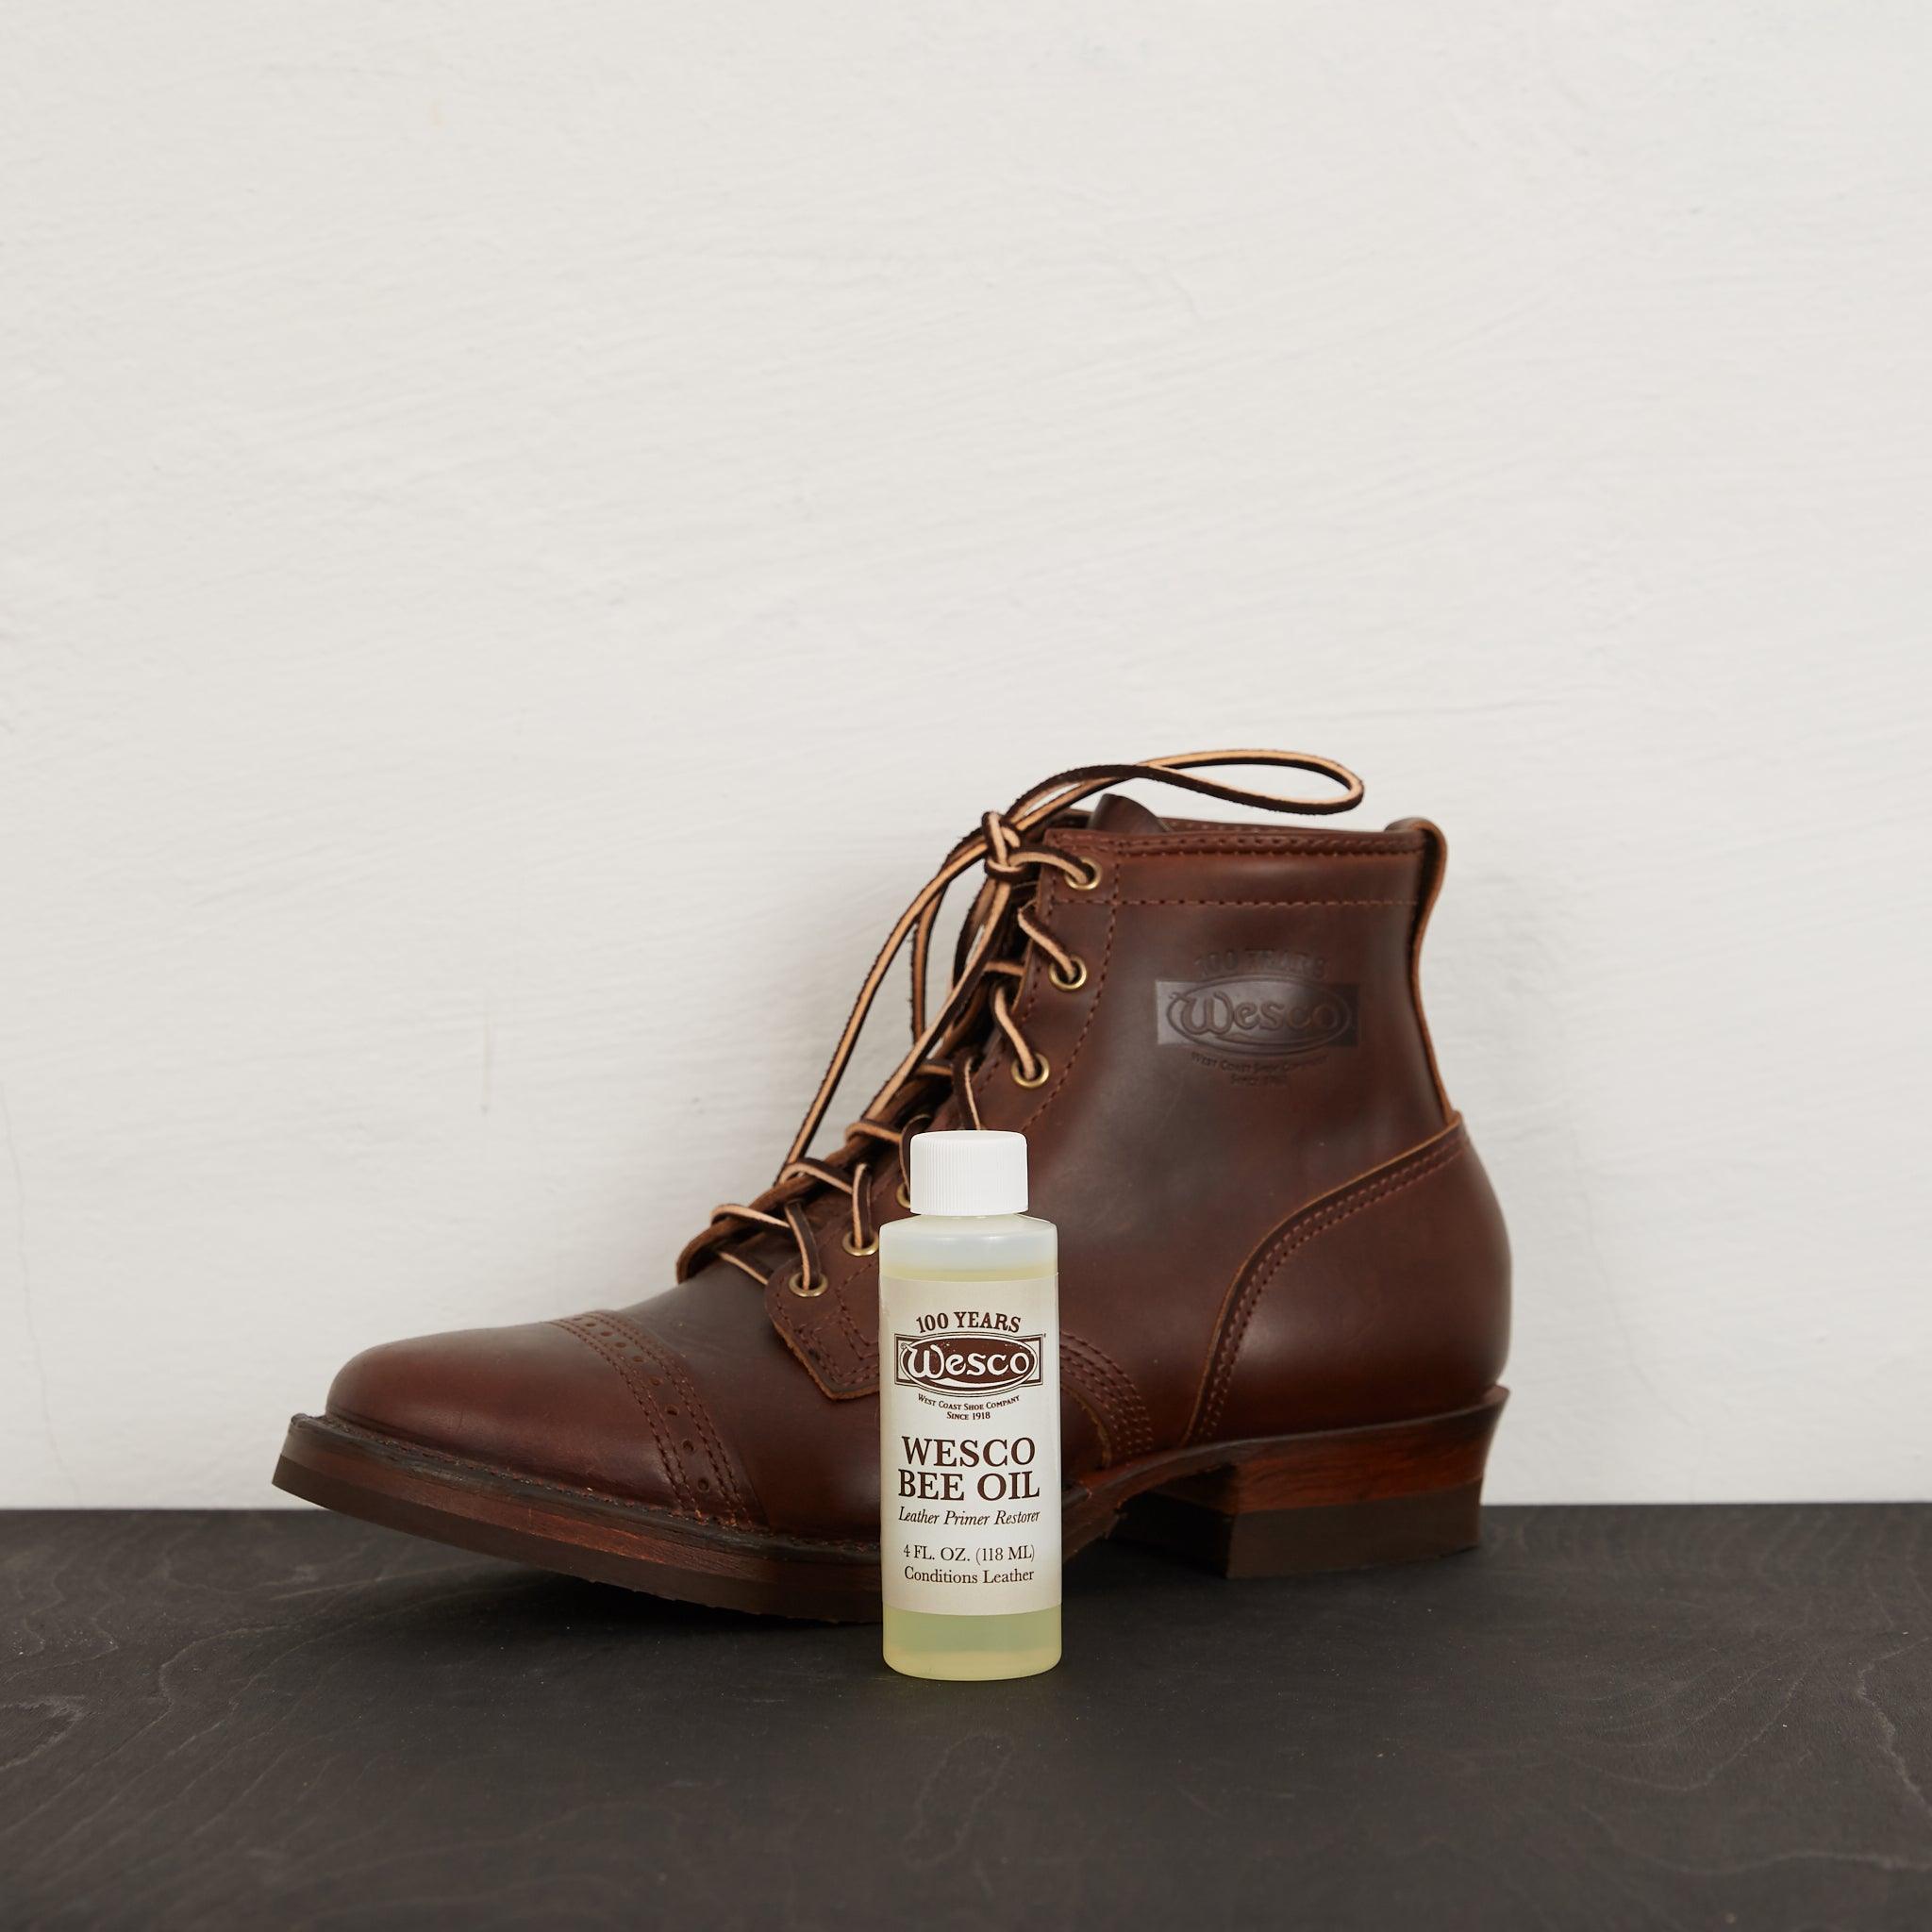 Image showing the Wesco Leather Boot Dressing Bee Oil which is a Shoecare described by the following info Footwear, Shoecare, Wesco and sold on the IRON HEART GERMANY online store